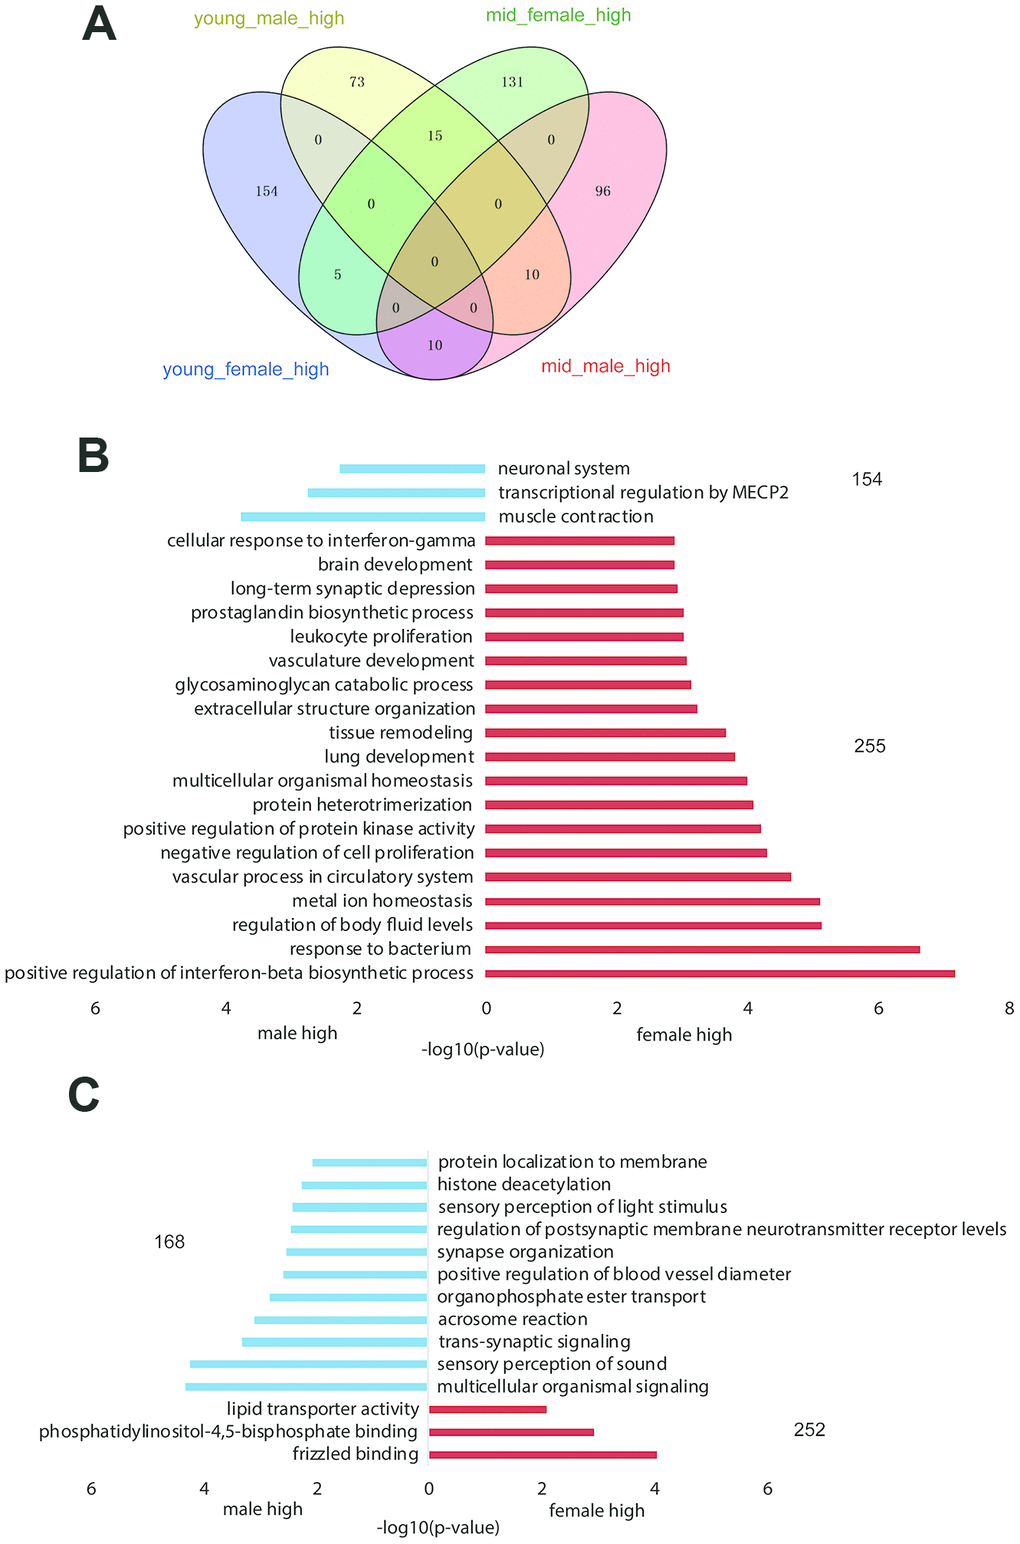 Gender-related differentially expressed genes in the hypothalamus of rhesus macaque. (A) The overlap of highly expressed genes in the rhesus macaque hypothalamus grouped by age and gender. (B, C) The GO functional enrichment of sex-related differentially expressed genes in the hypothalami of young (B) and middle-aged (C) macaques (red: upregulated genes in females; blue: upregulated genes in males).